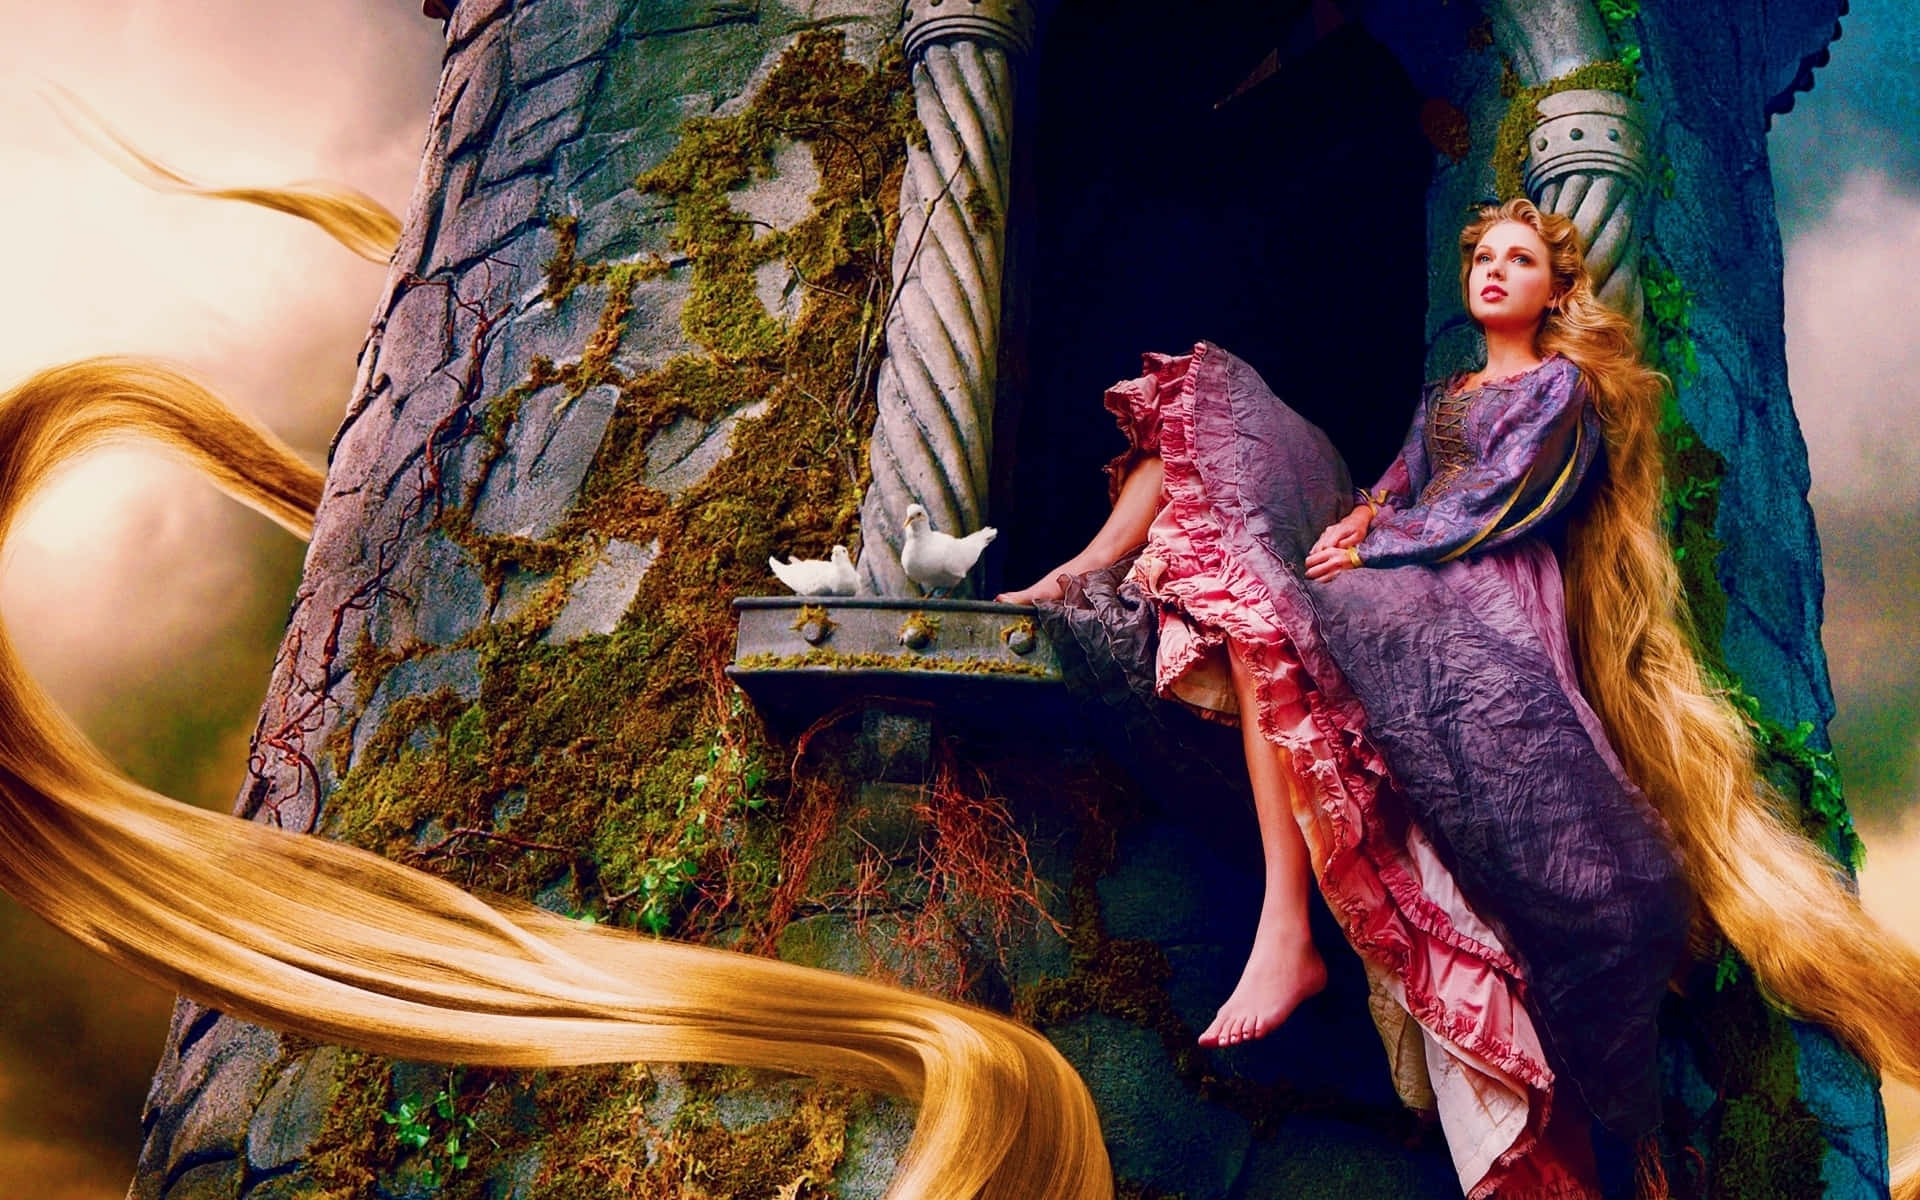 Rapunzel with her magical golden hair in a magical forest